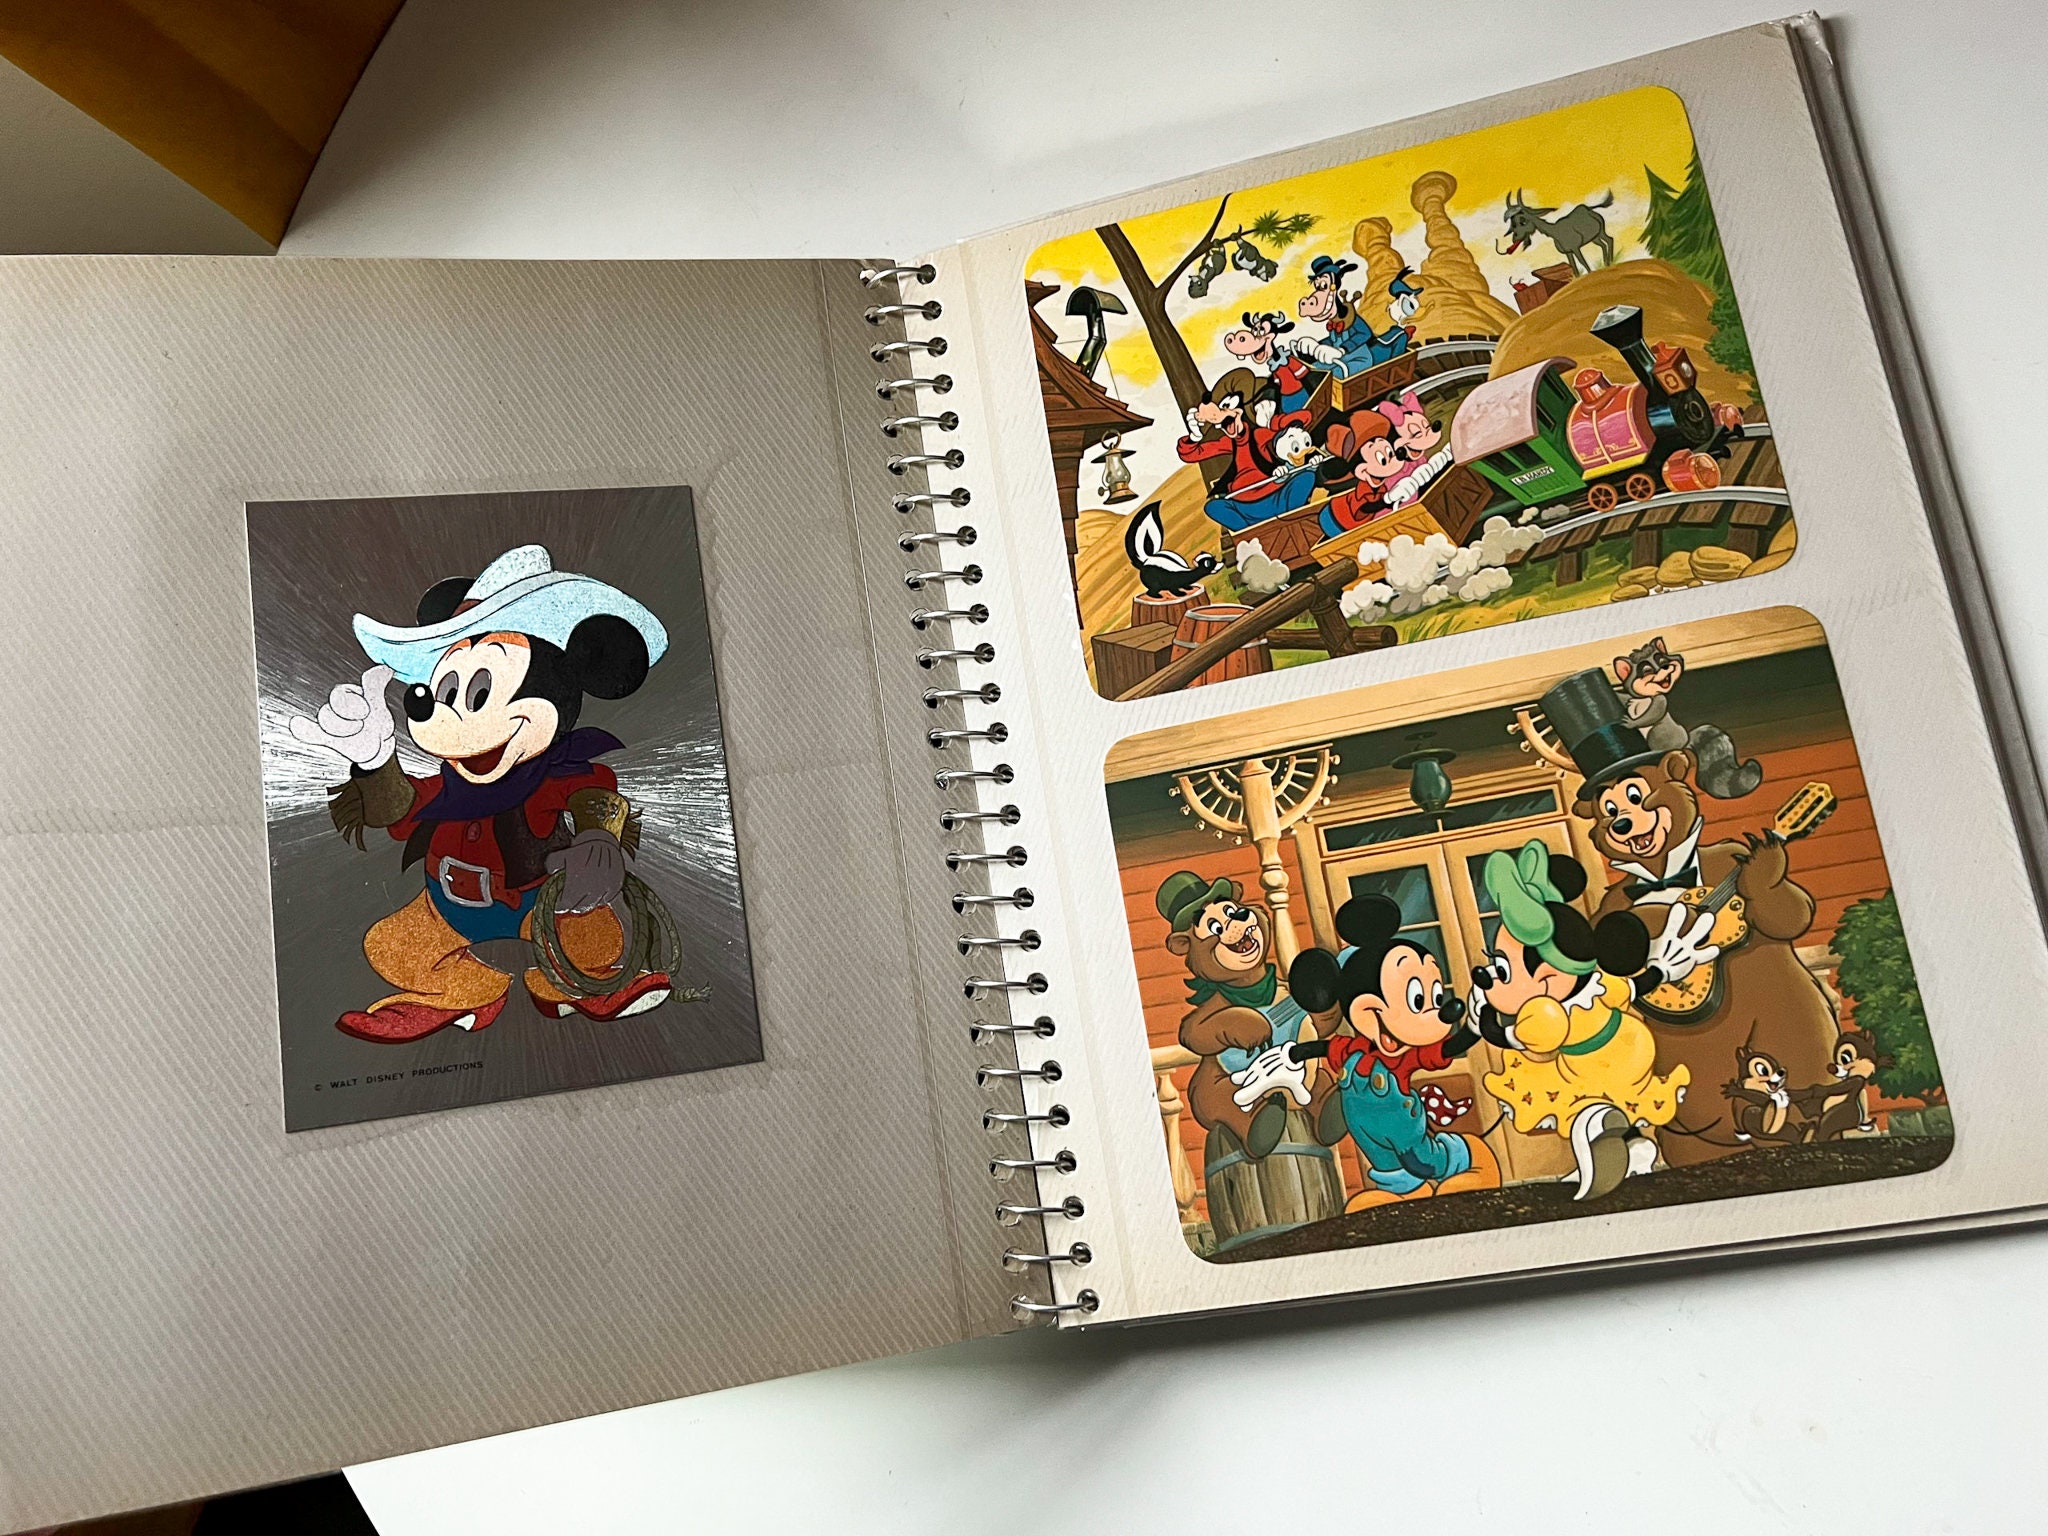 NEW Set of 3 Disney Photo Albums Mickey Mouse, Mickey and Friends